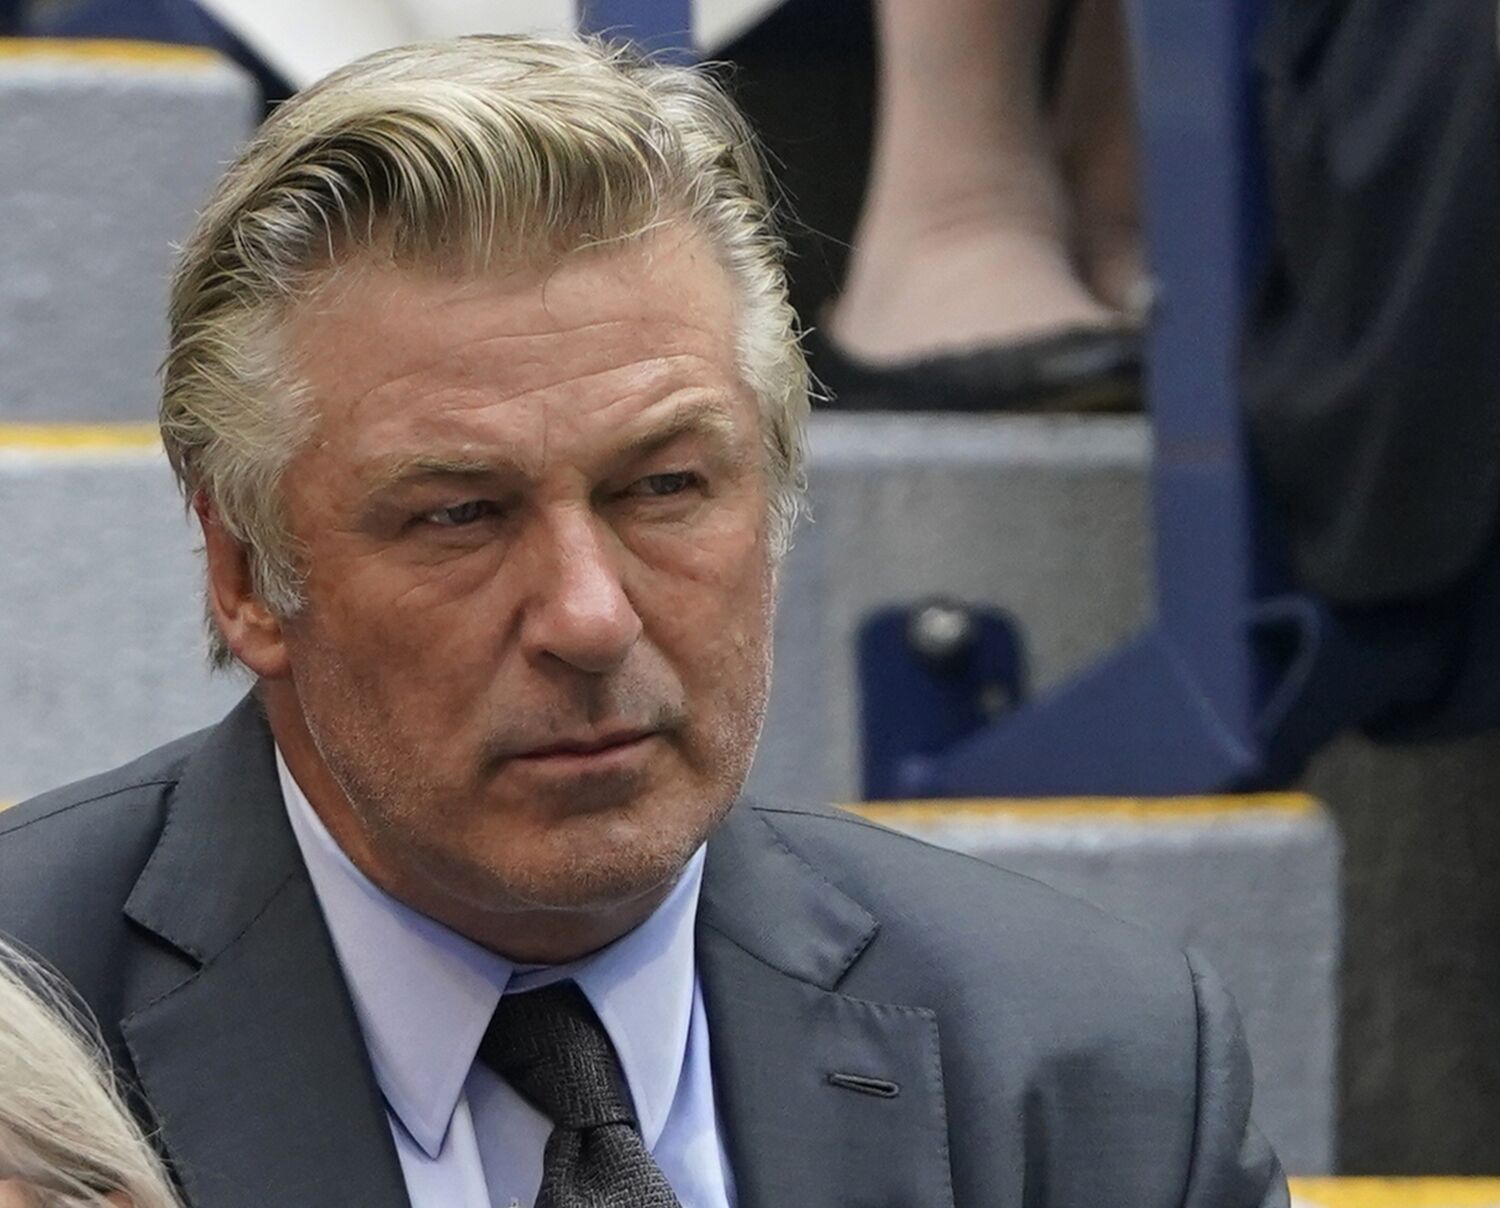 Key question at Alec Baldwin's criminal trial: Is he to blame for Halyna Hutchins' death?